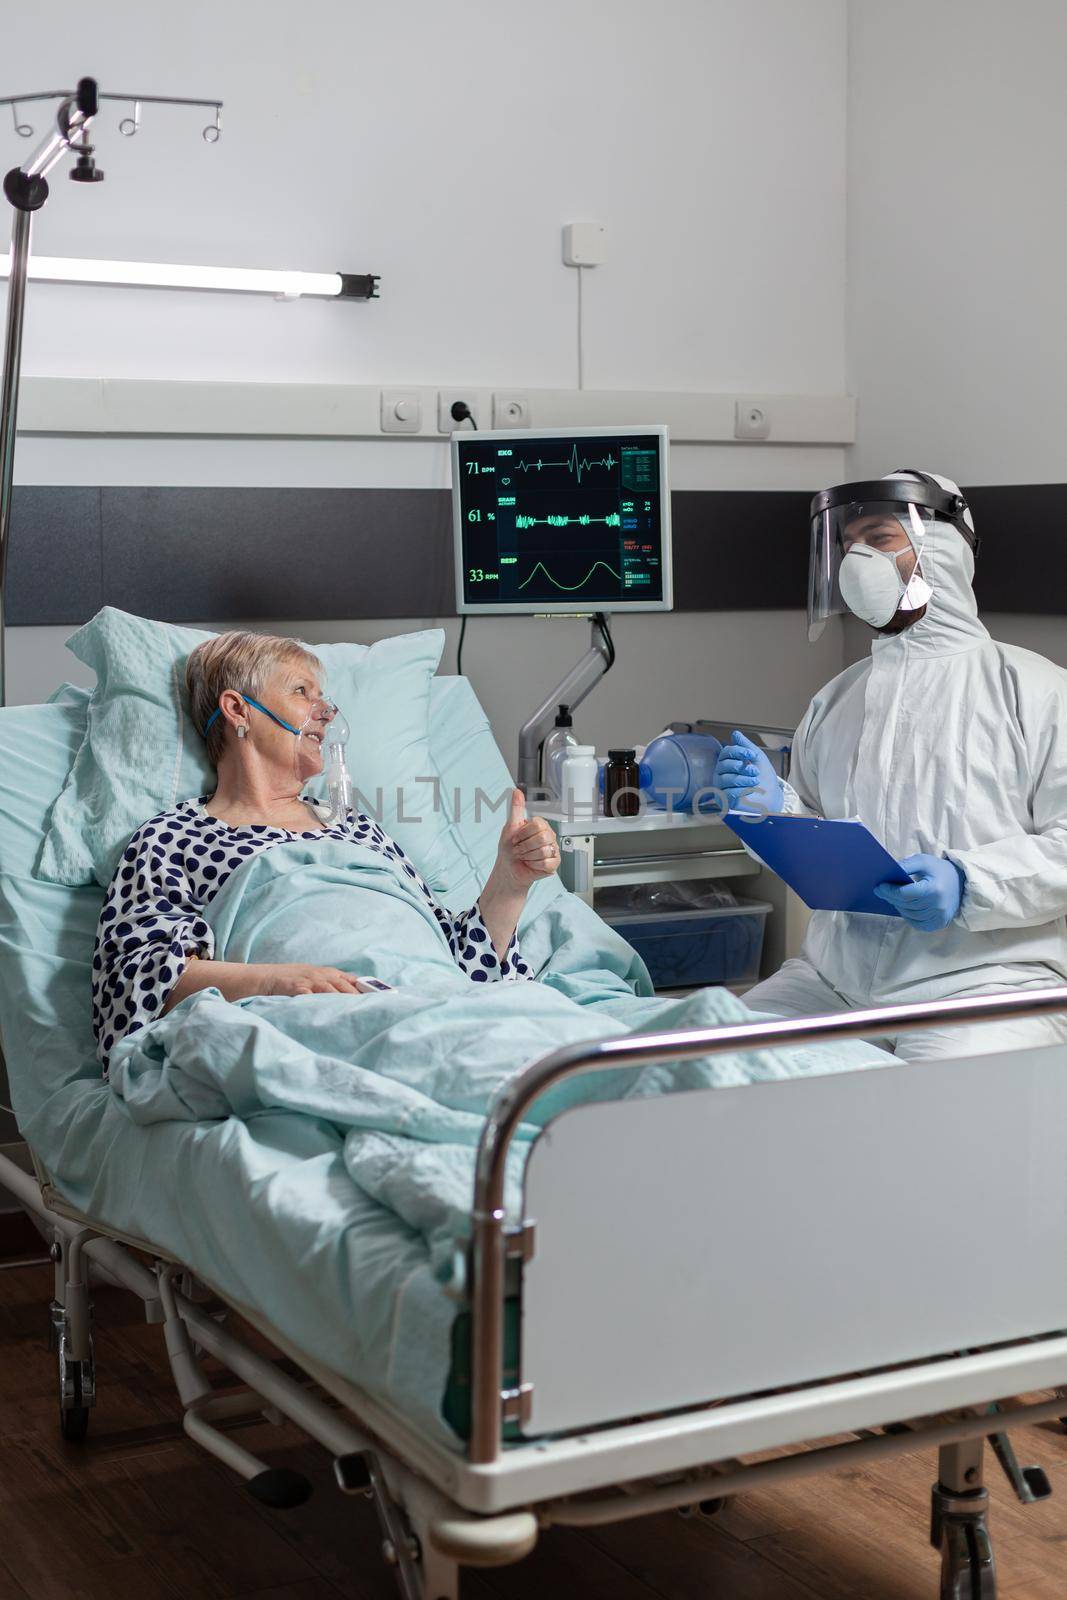 Doctor dressed in ppe suit with face shiled discussing with senior patient, laying in bed with oxygen mask during coronavirus outbreak. Getting intravenous medicine through iv drip bag.